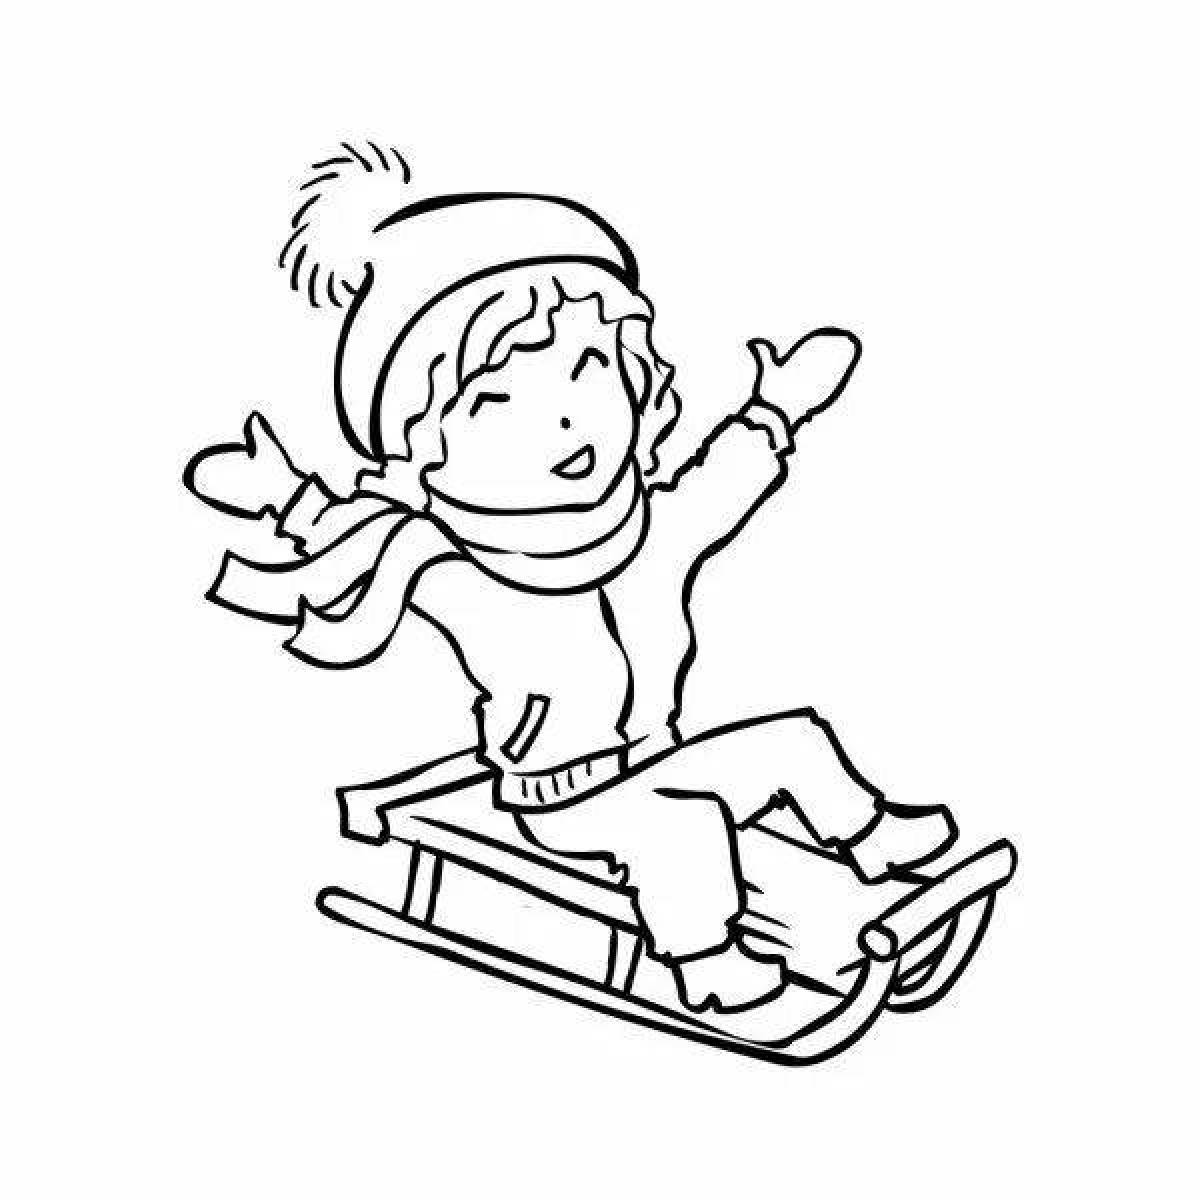 Exciting sledding coloring book